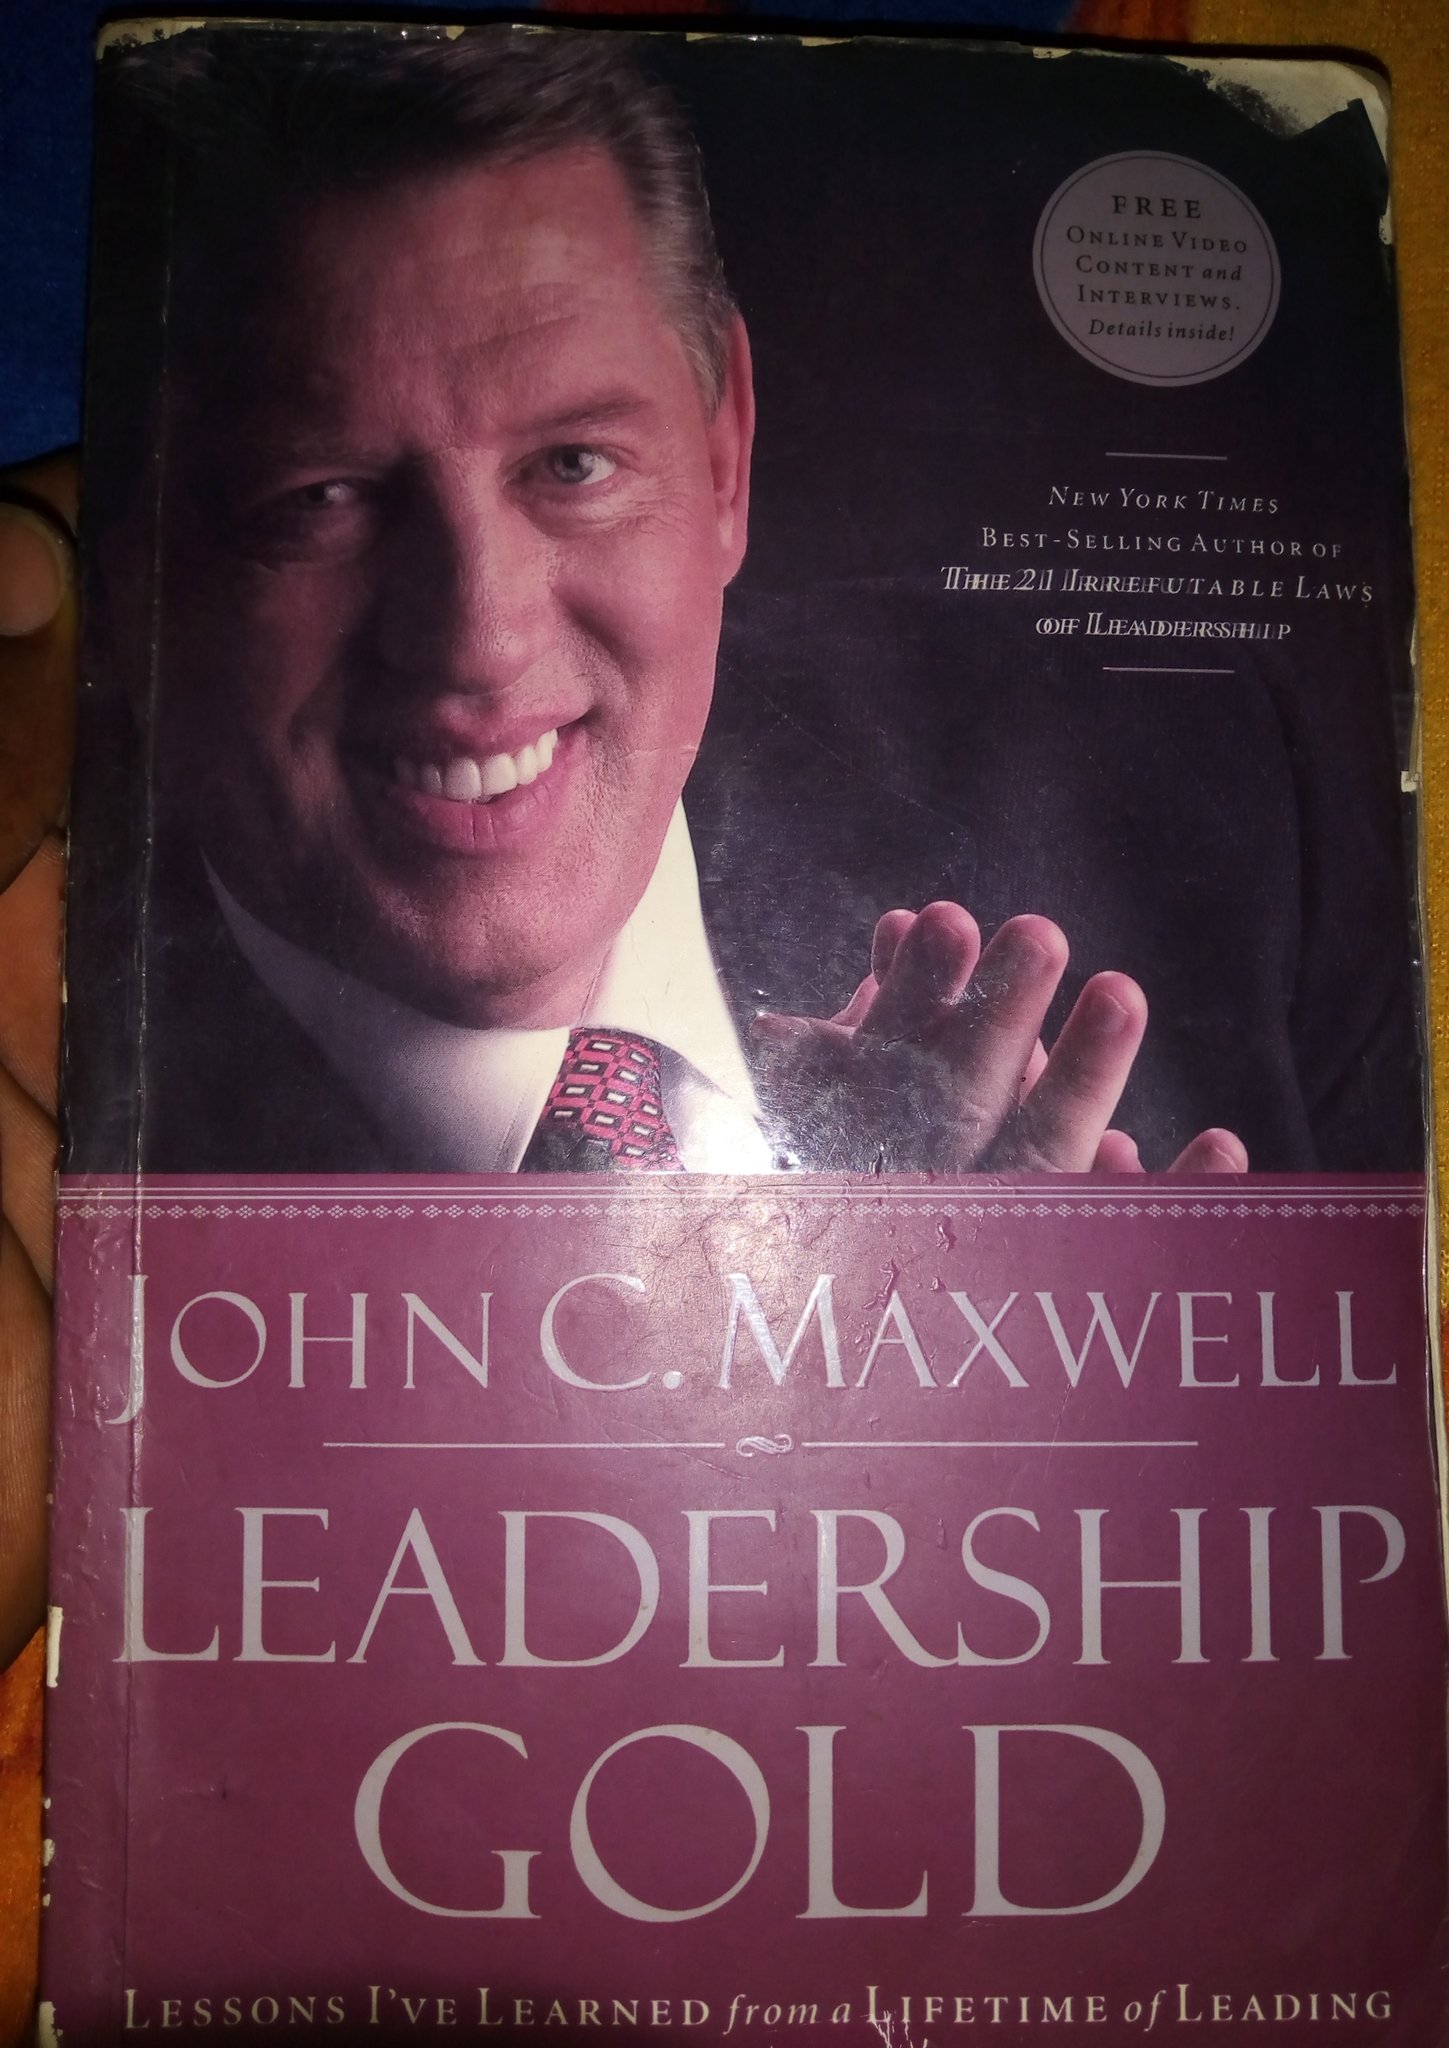  Talking about leadership Personified...
Happy birthday Sir John C. Maxwell. 